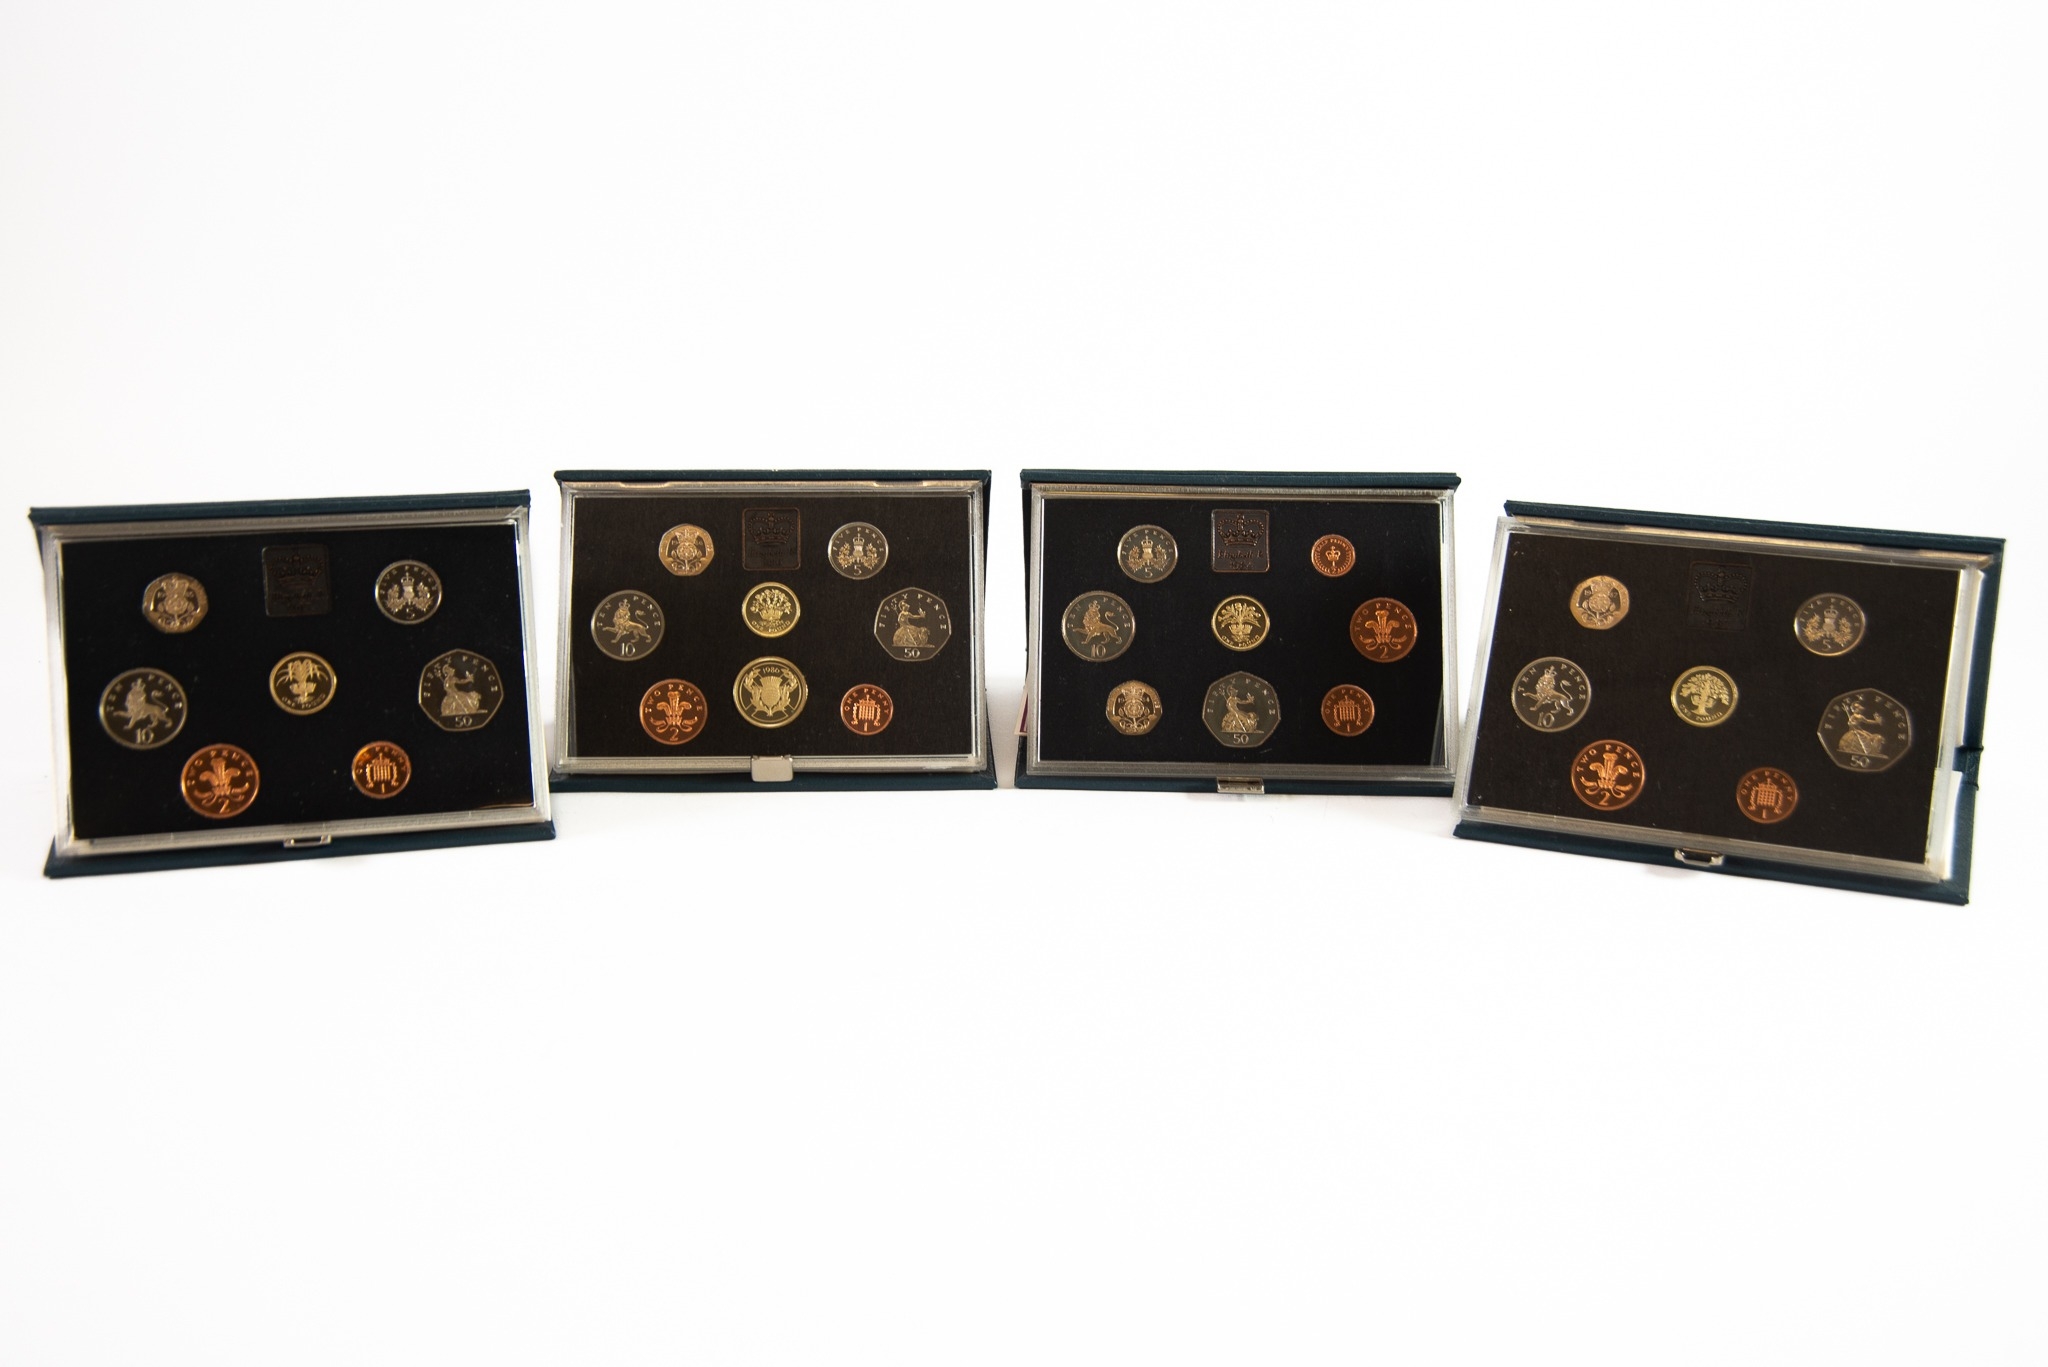 FOUR ROYAL MINT UNITED KINGDOM PROOF COIN SETS, for years 1984, (lacks certificate), 1985, 1986